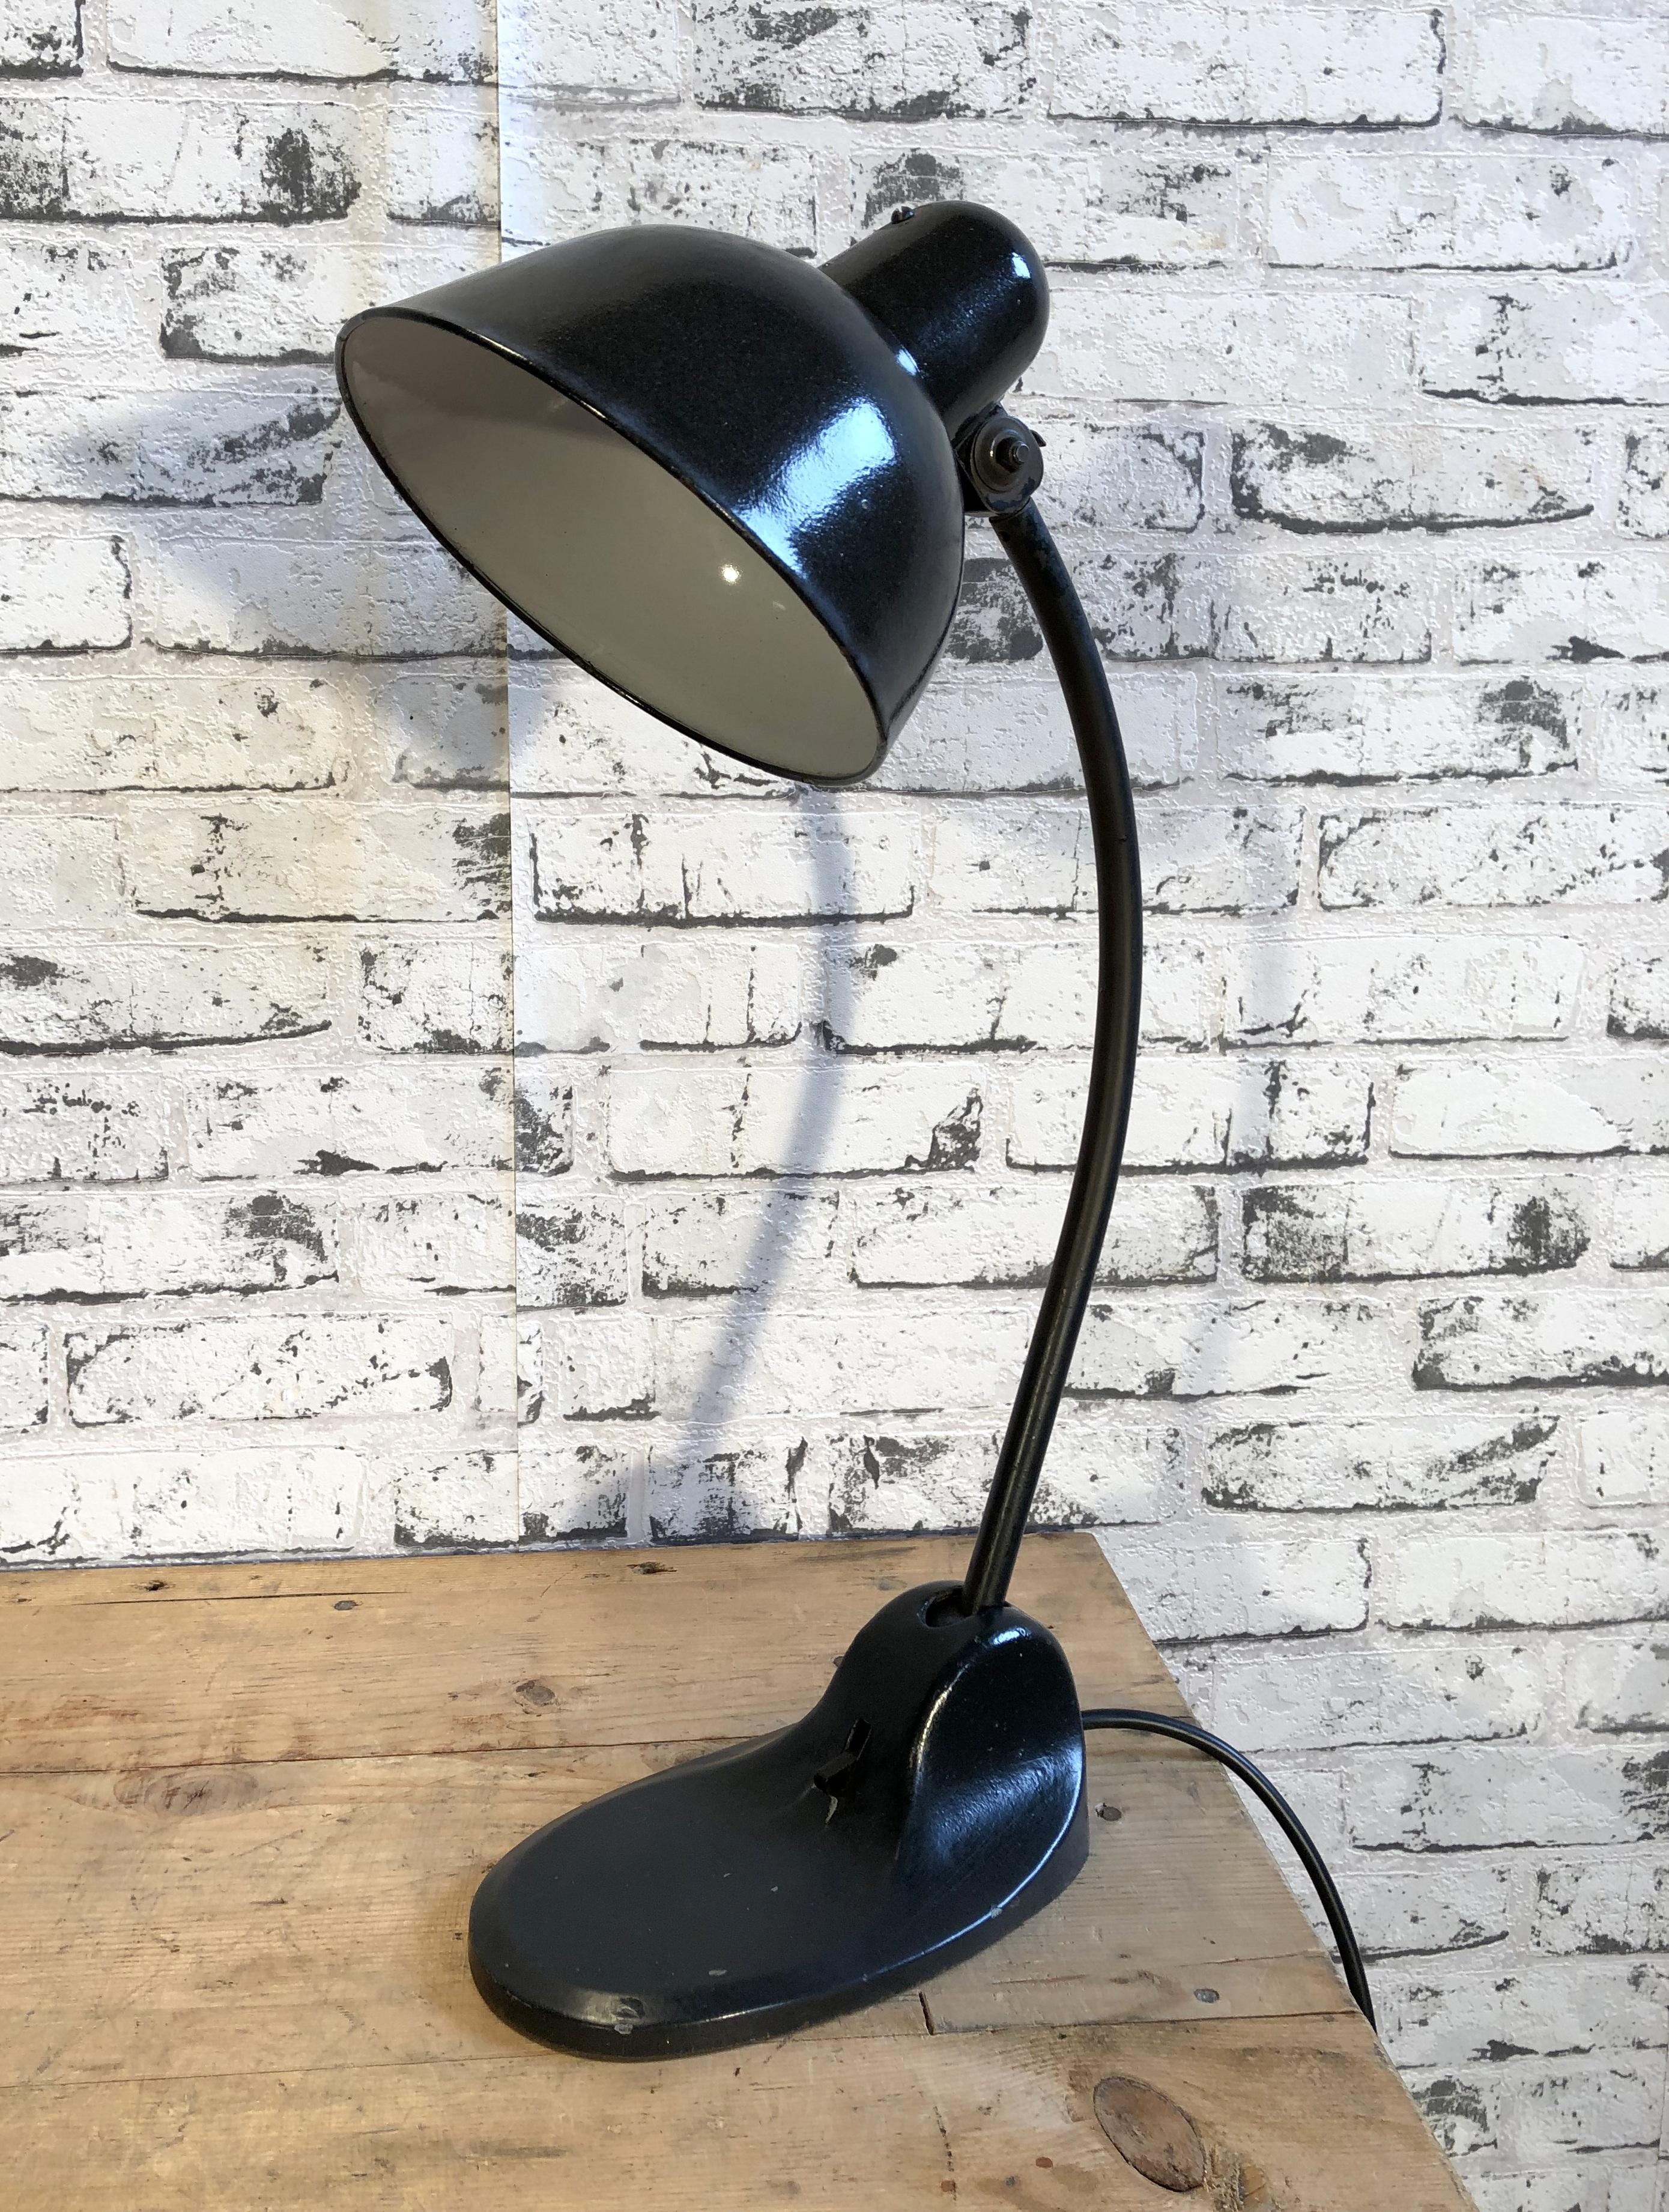 Black Industrial table lamp made by Siemens during the 1930s.It features black enamel shade, white interior, black iron base with original switch and arm with two adjustable joints. Original socket for E 27 lightbulbs. Fully functional.